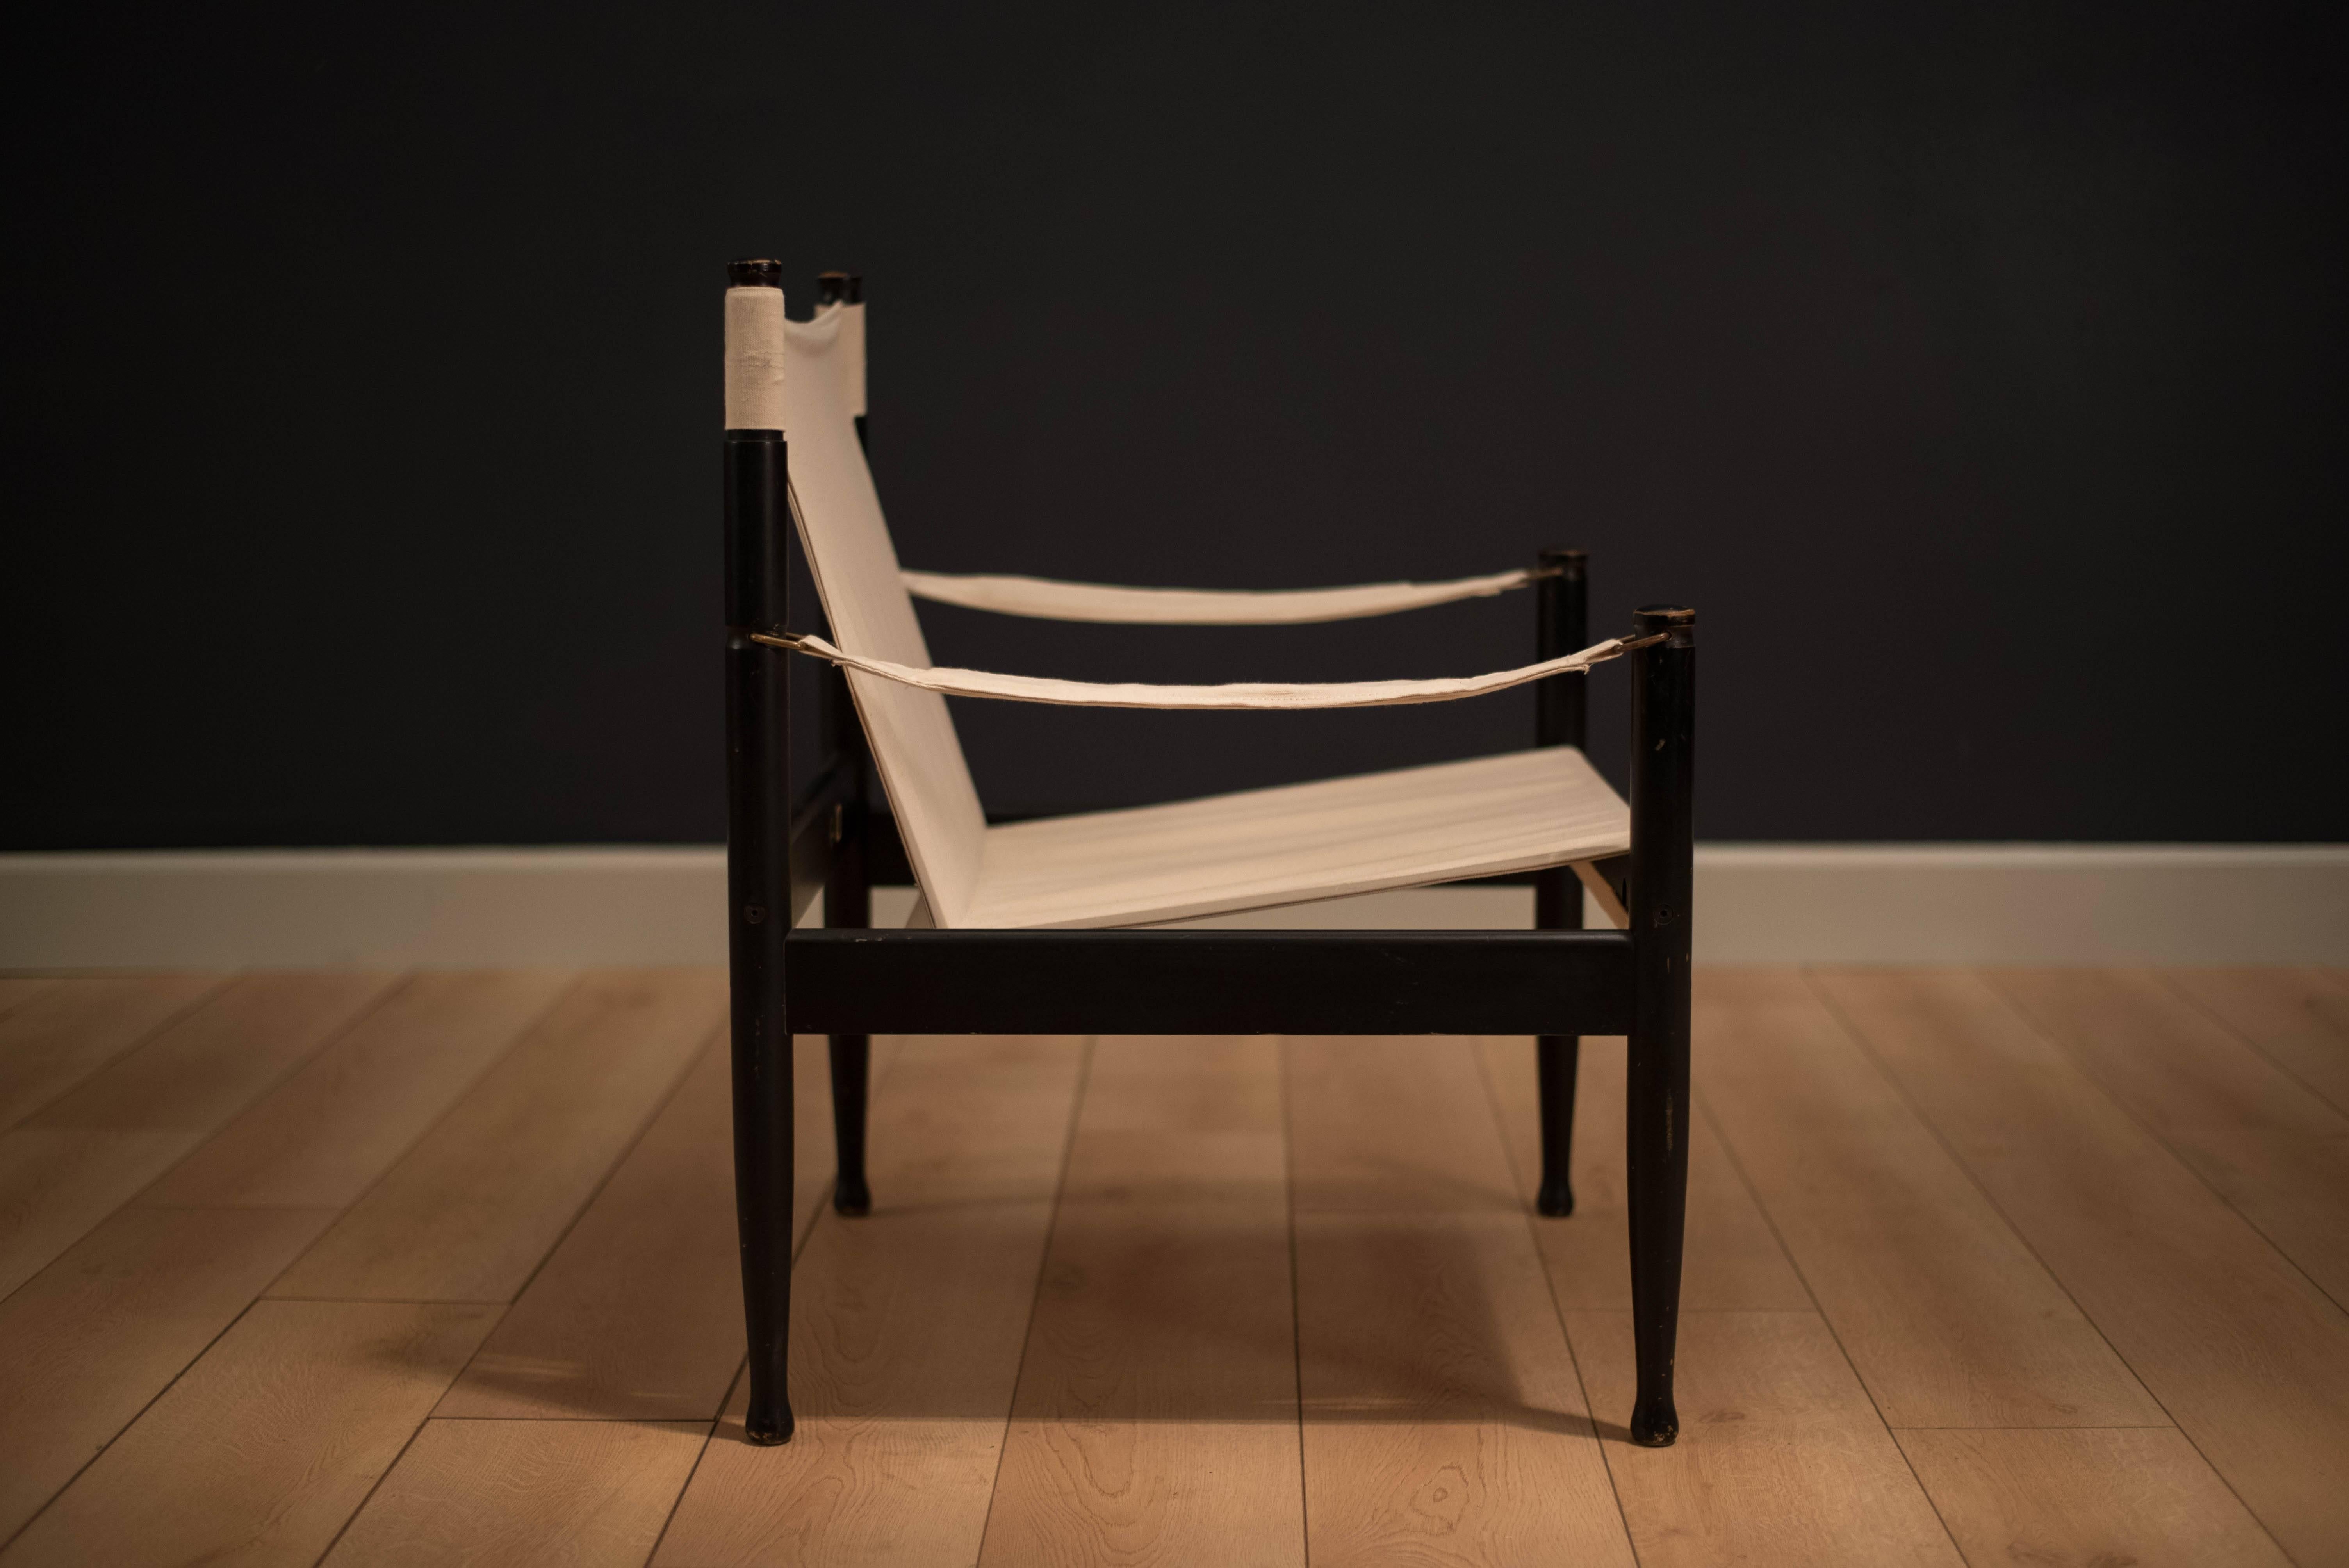 Mid-century Safari chair designed by Erik Worts for Niels Eilersen, Denmark. This piece has been reupholstered in a natural canvas sling. The original black lacquer frame displays some vintage patina.

